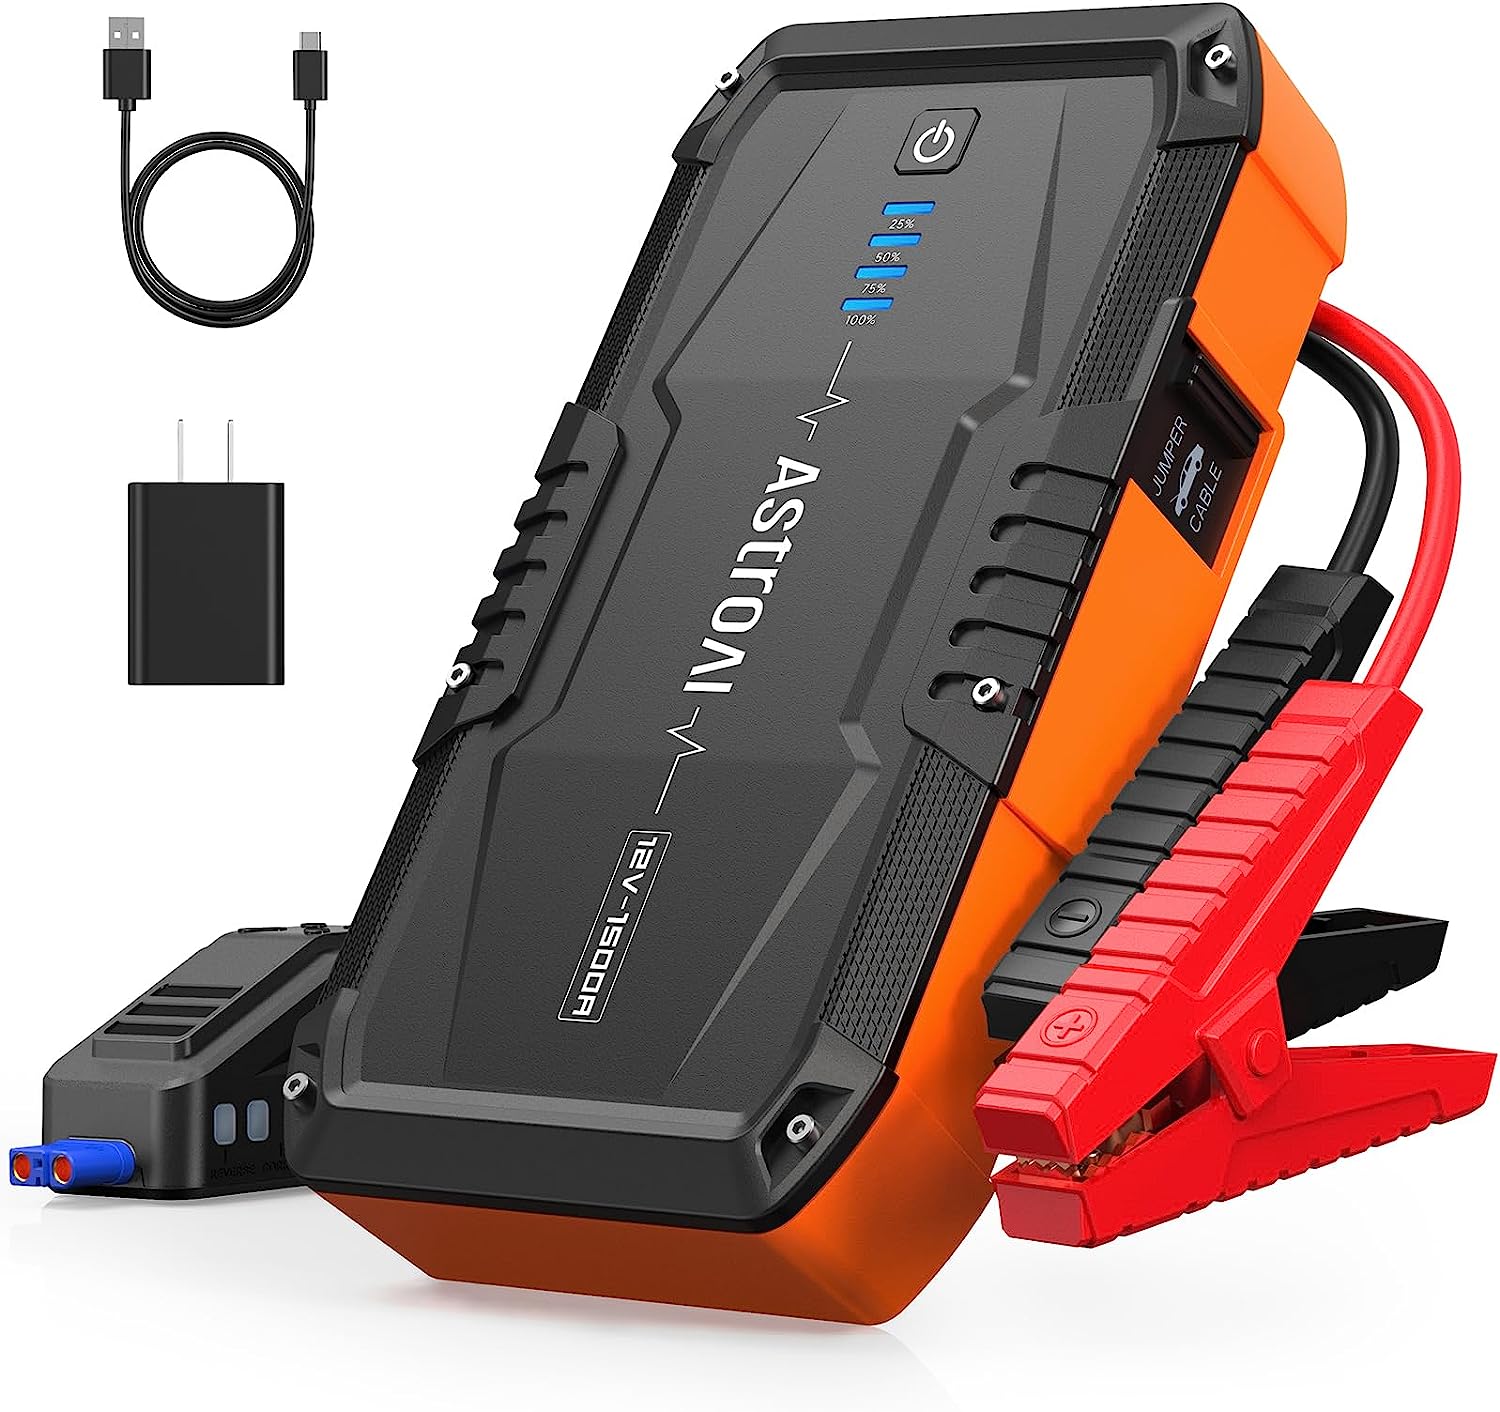  YaberAuto 5000A Car Battery Jump Starter for All Gas/10.0L  Diesel Engines, 99.16Wh Portable Car Jump Starter Battery Pack, 12V Car  Battery Jumper with Safety Jumper Cables, Fast Charge 3.0, Lights 